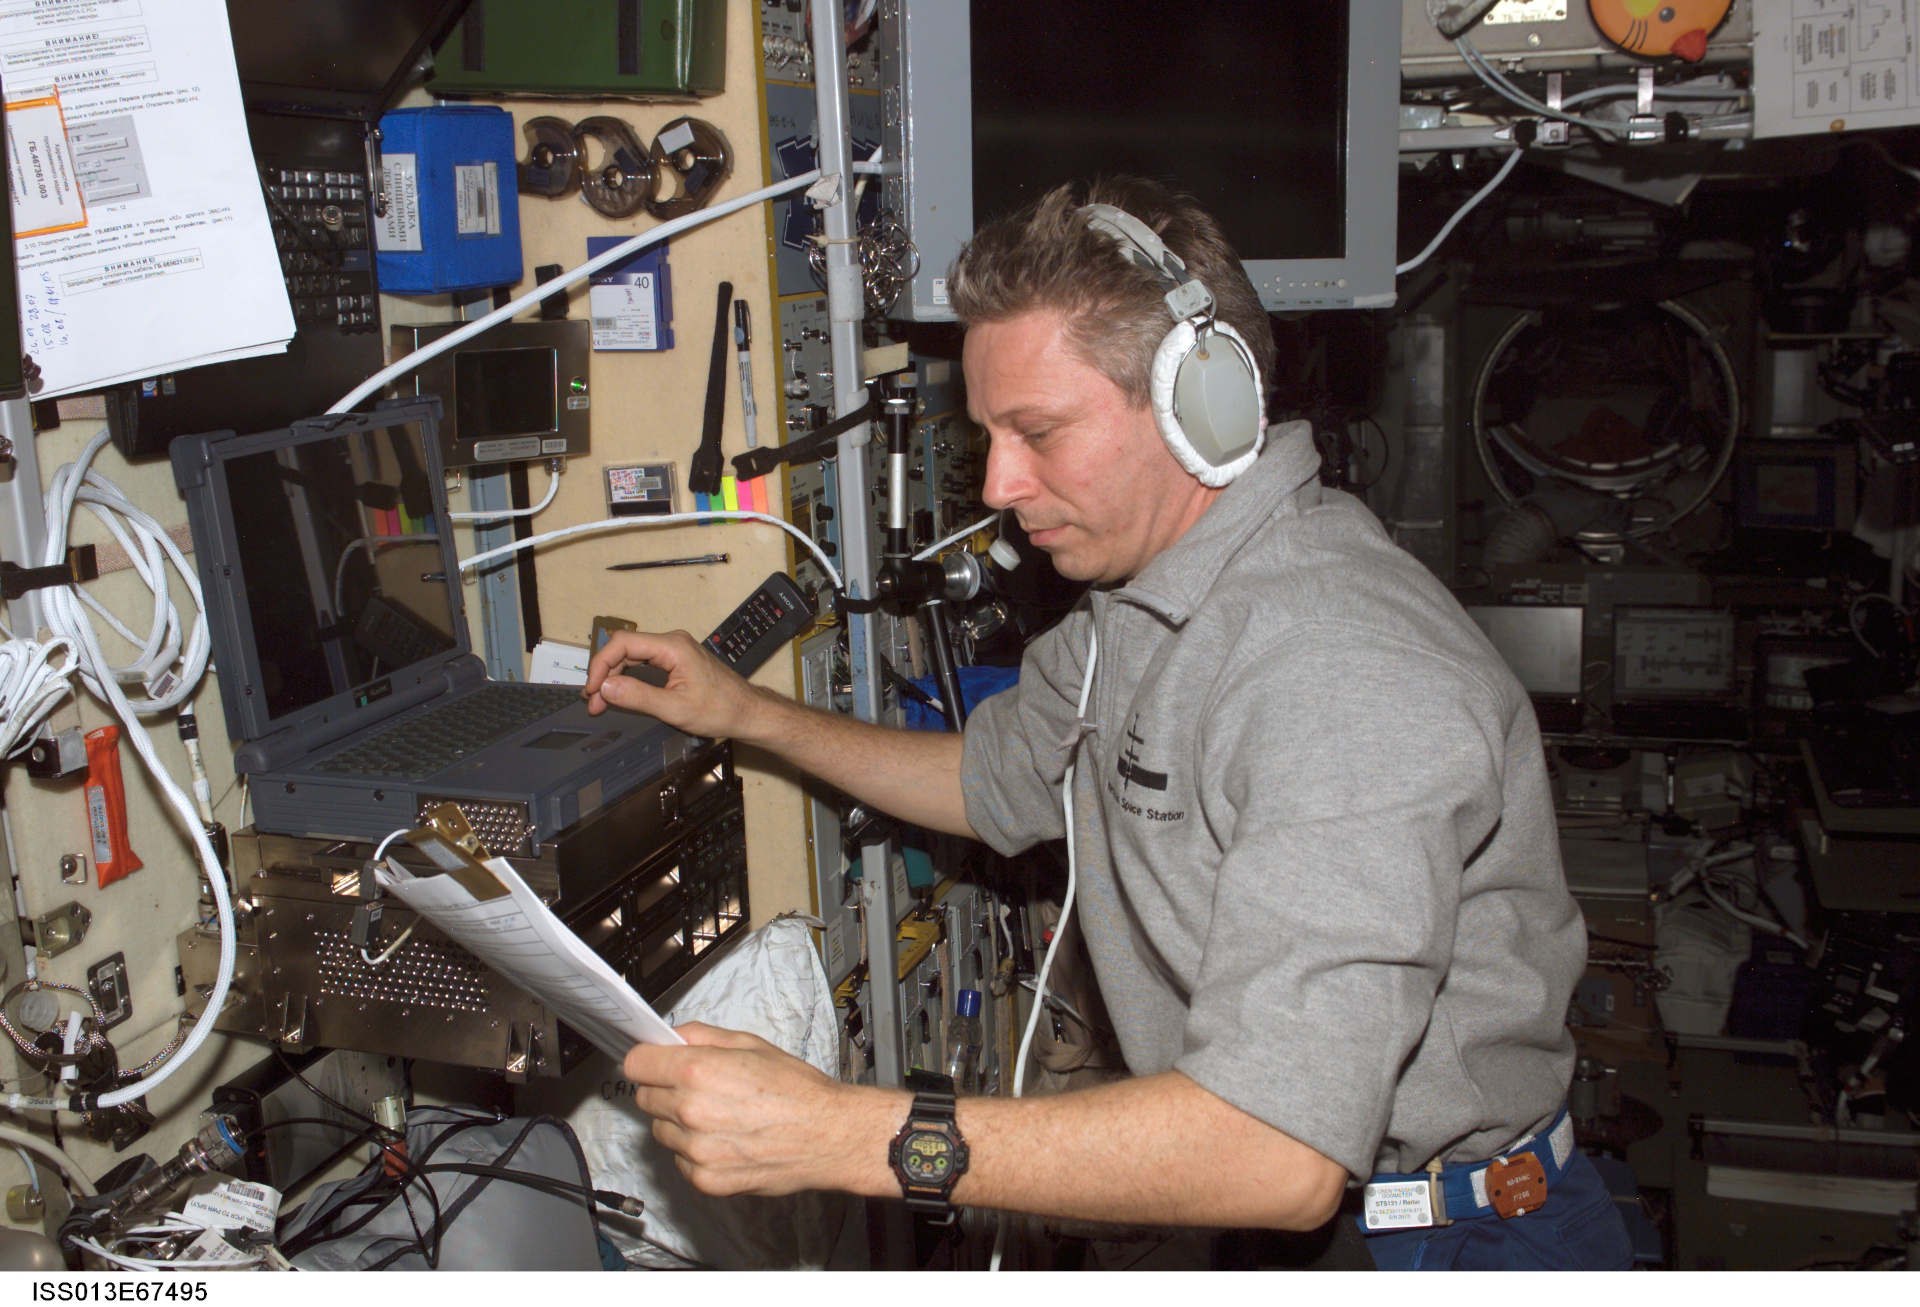 Astronaut Thomas Reiter operating the 'PK-3 Plus' control computer in July 2006, during his Astrolab mission on the ISS